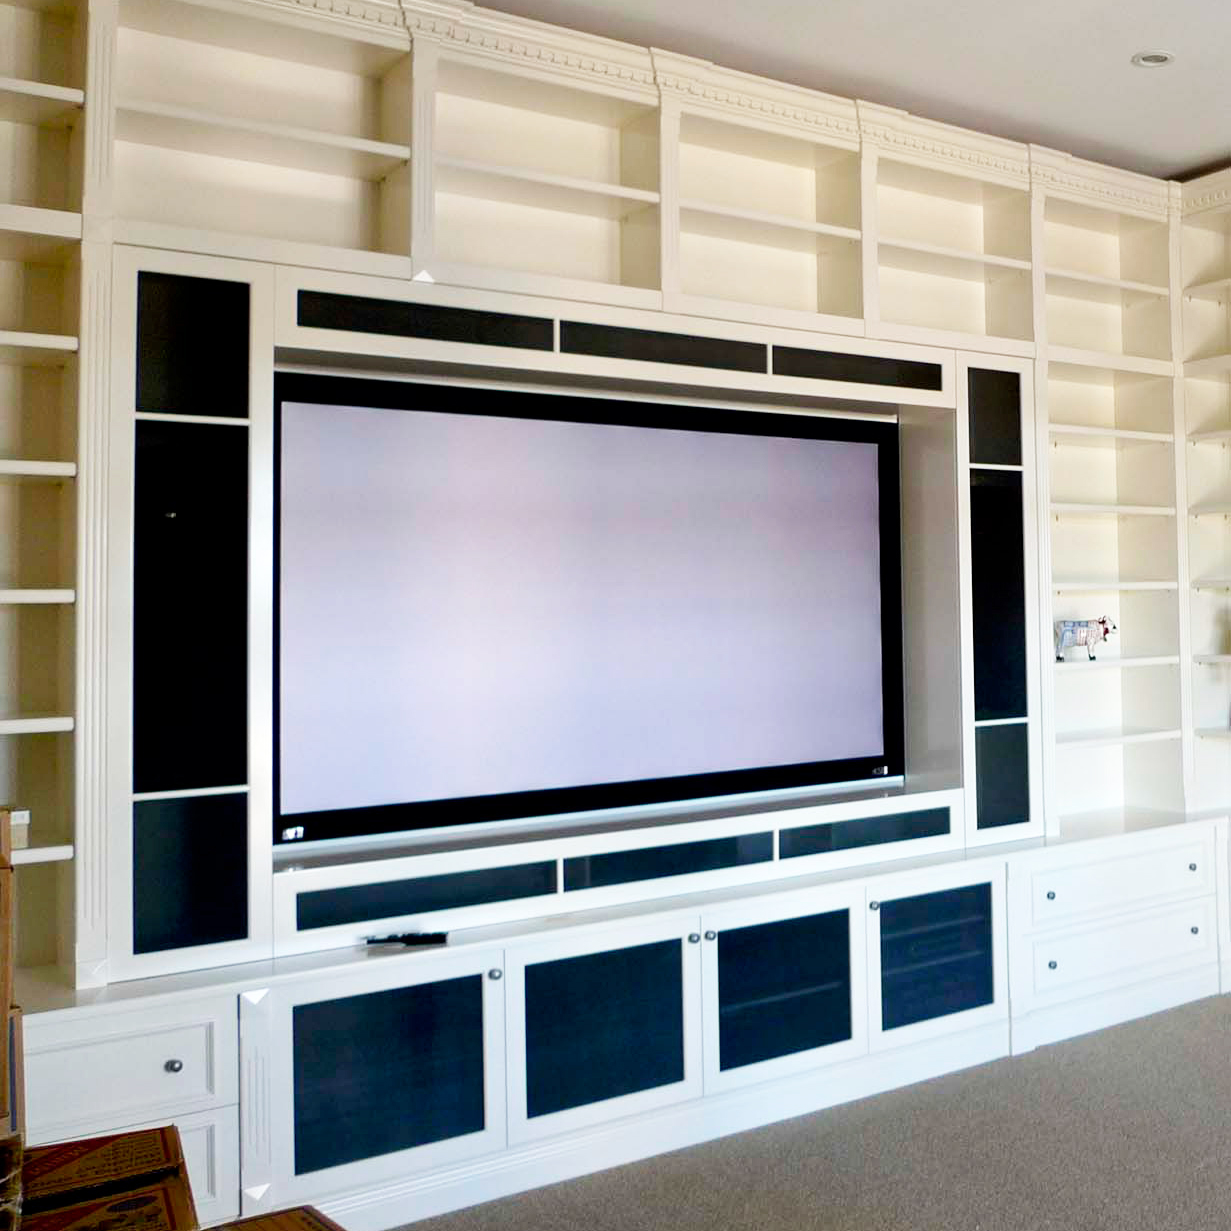 Moderne Classique Wall To Tv Unit, Modern Wall Units For Living Room Australia